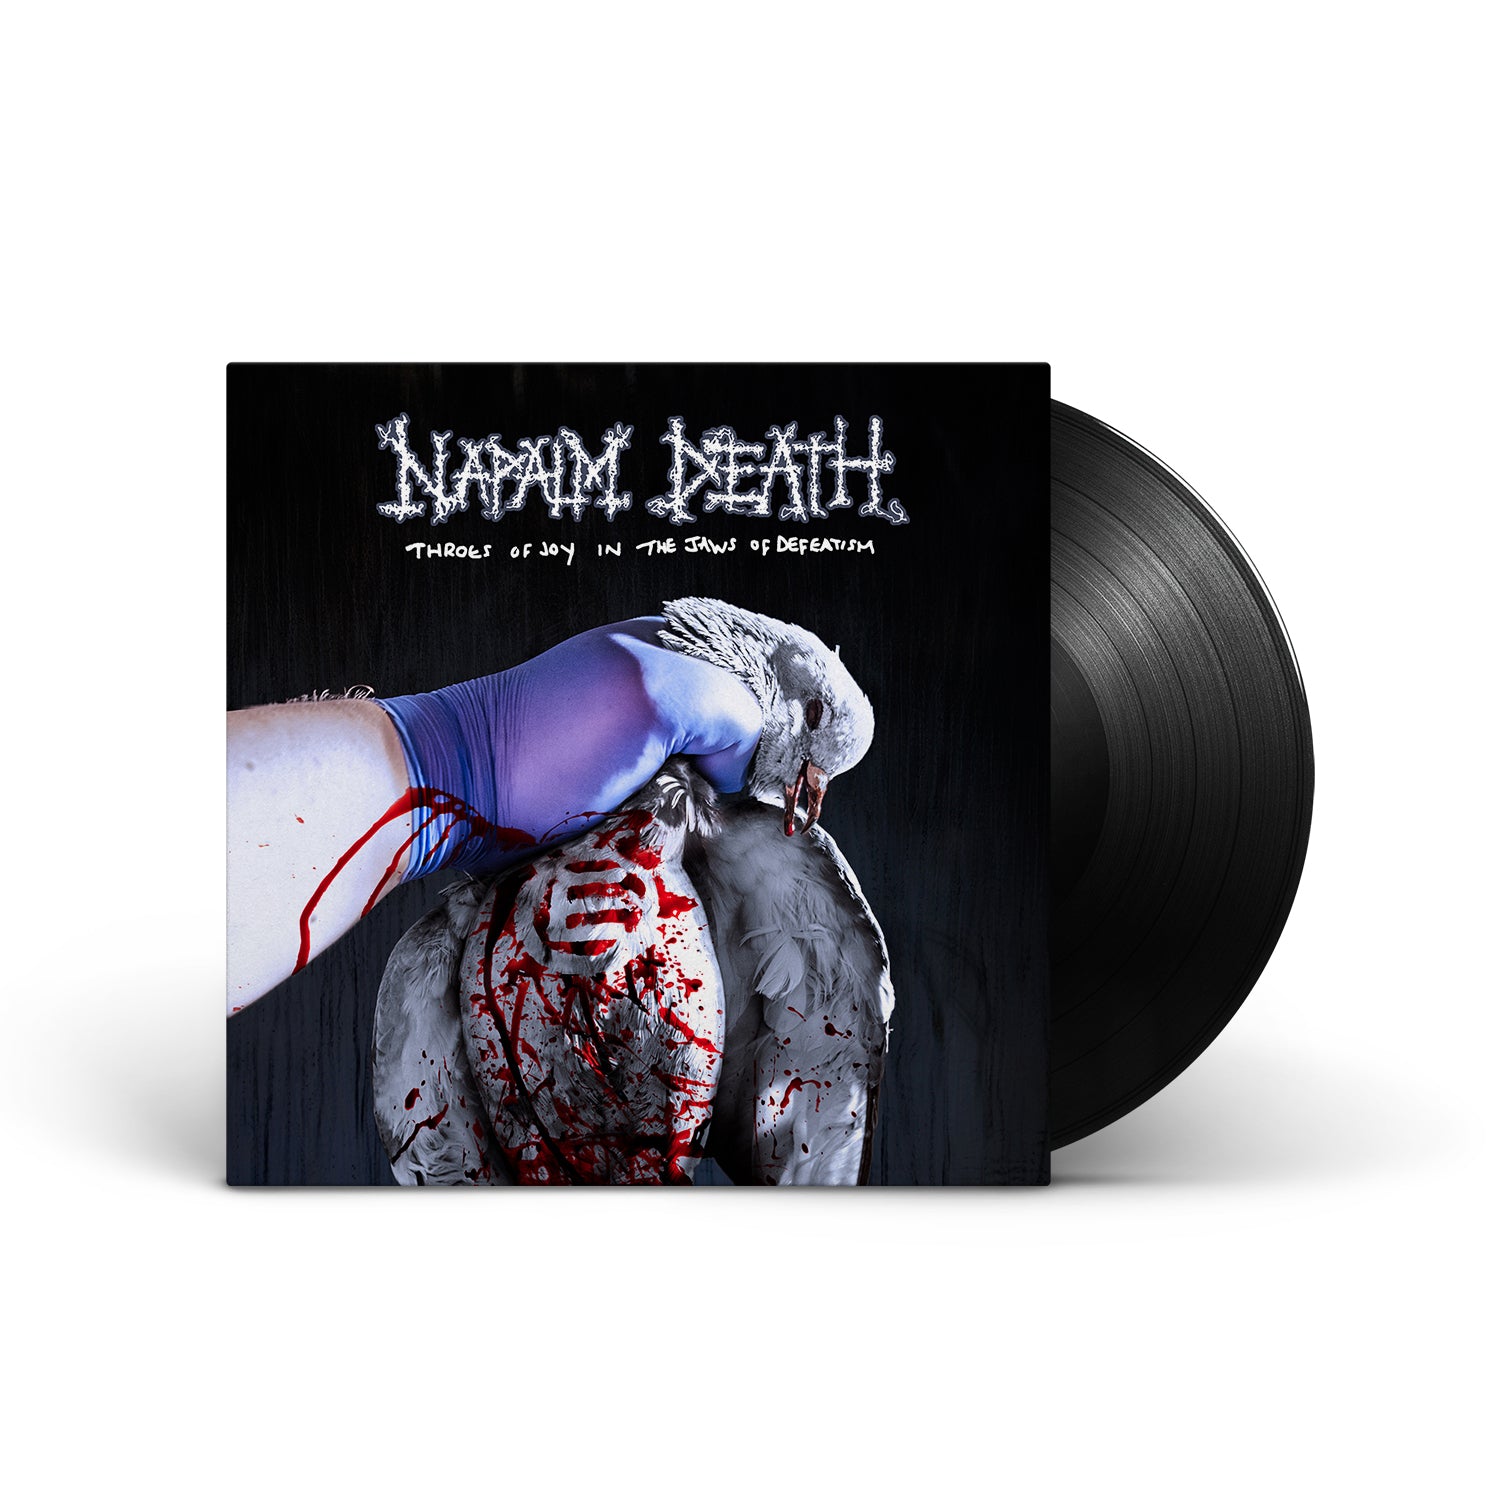 NAPALM DEATH - Throes Of Joy In The Jaws Of Defeatism - LP